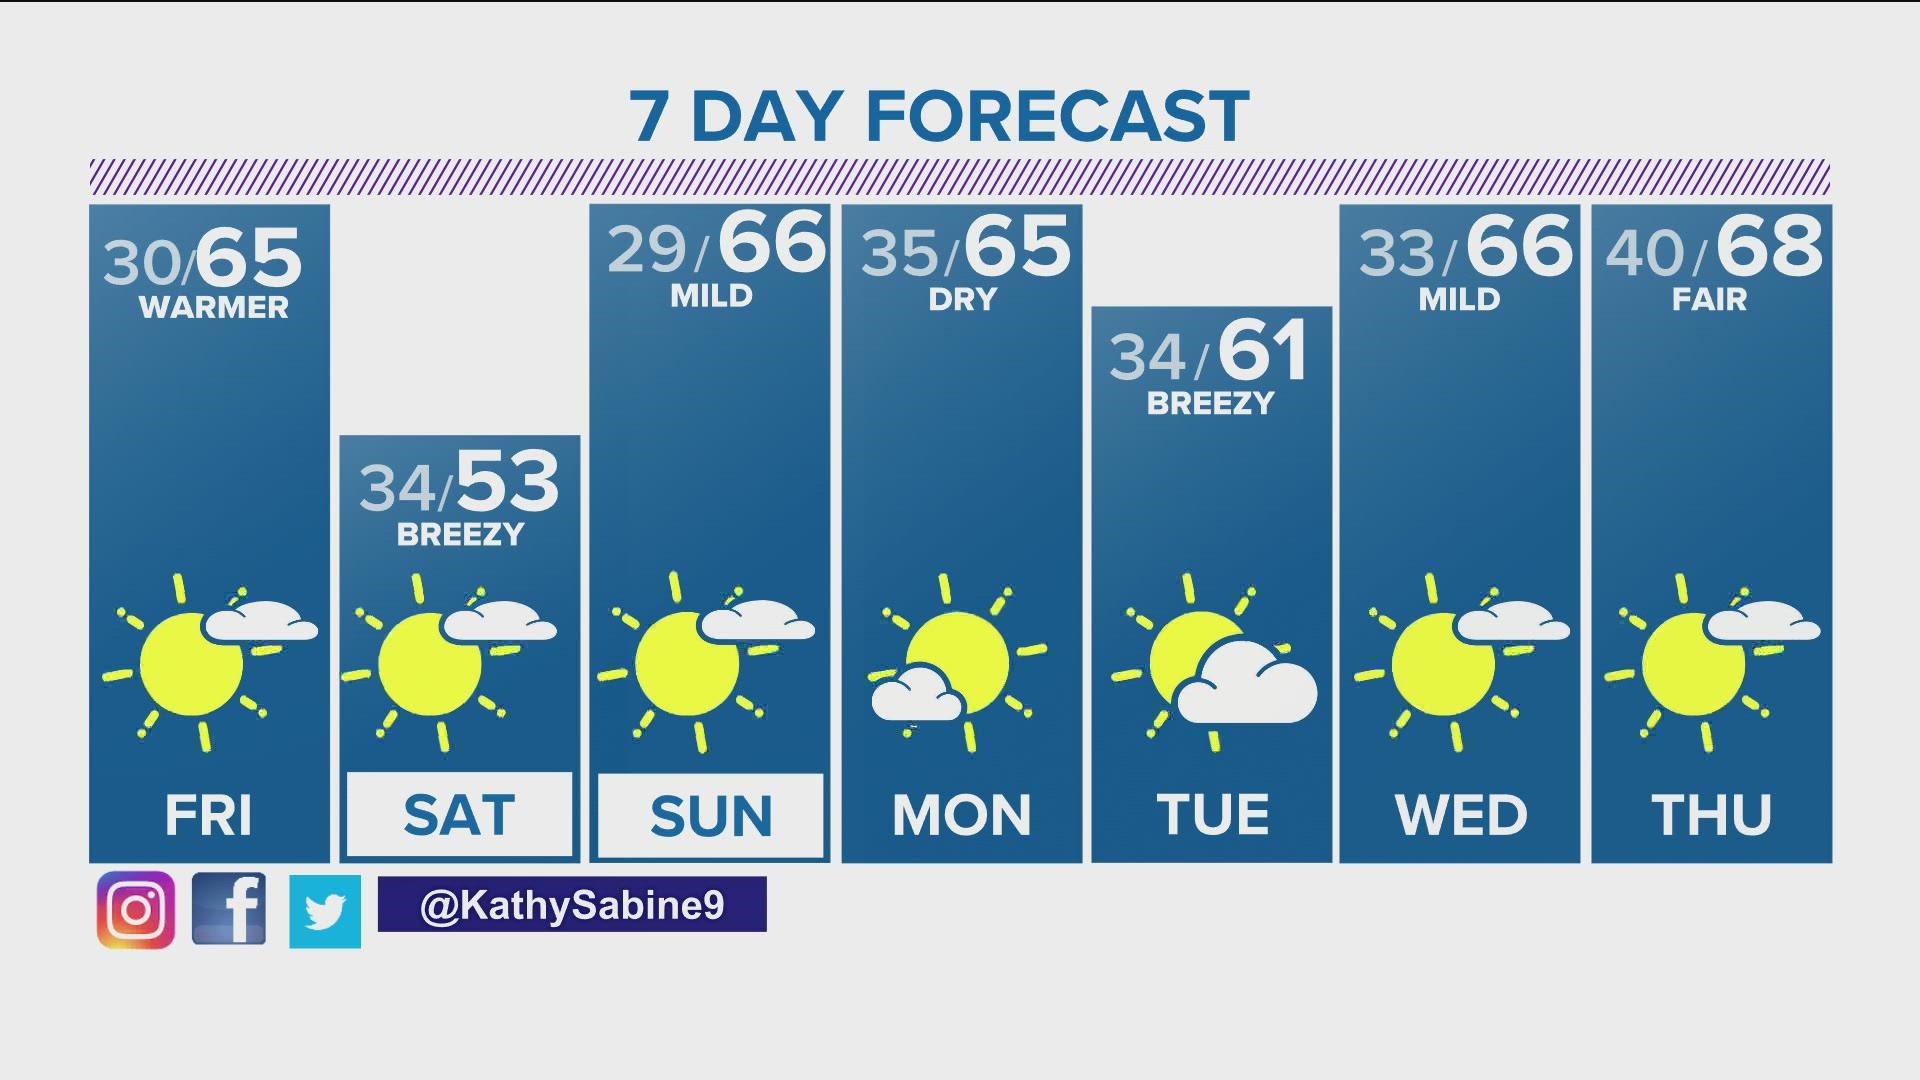 Sunshine and warm weather will carry us into the weekend and first part of next week.